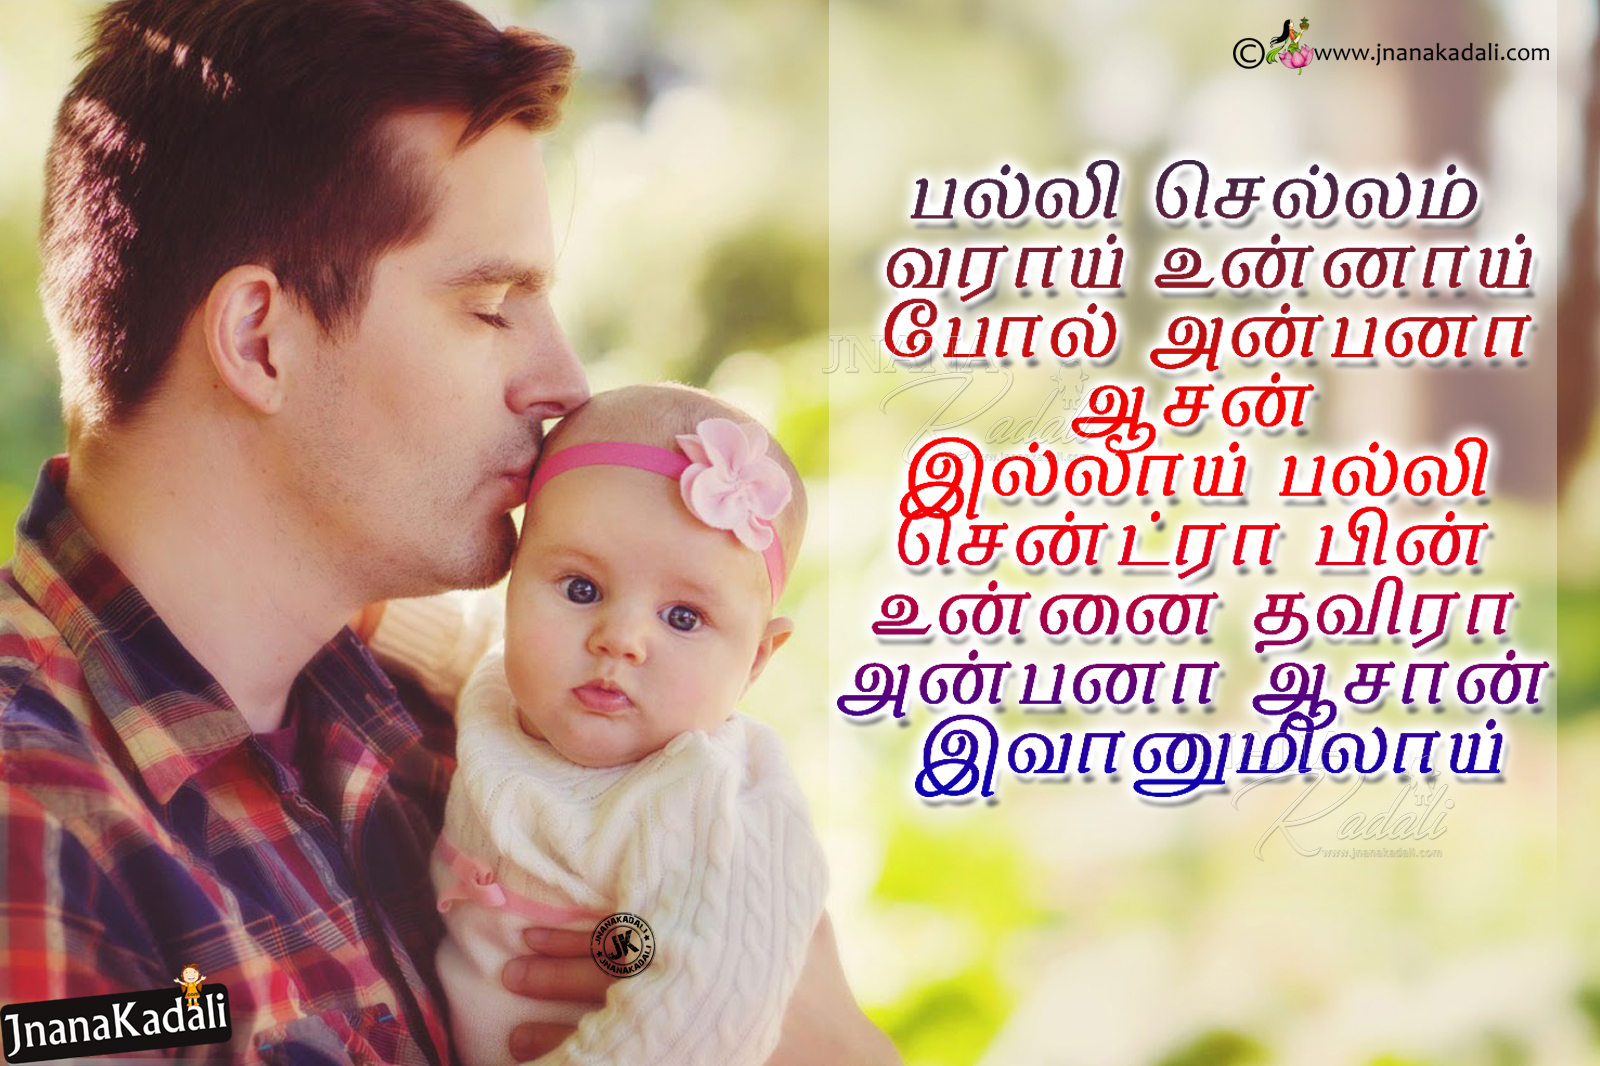 Heart Touching Tamil Father Quotes messages thoughts for WhatsApp ...